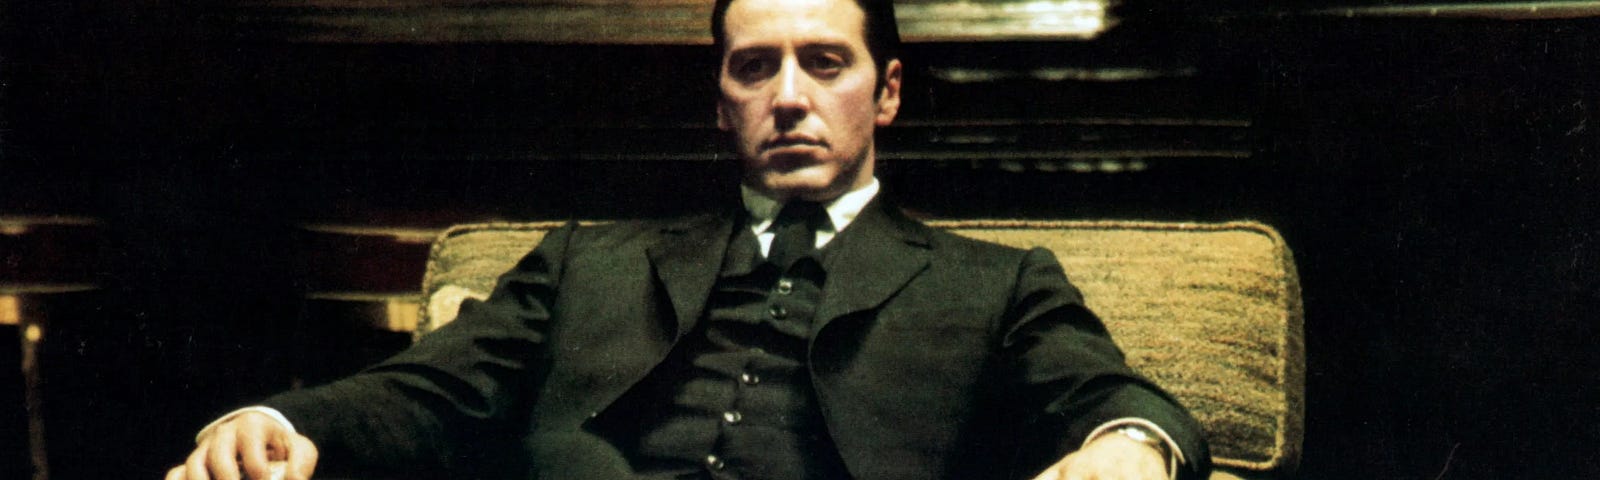 Al Pacino sits in a chair in a scene from the film ‘The Godfather- Part II’, 1974.Photo- Paramount/Getty Images